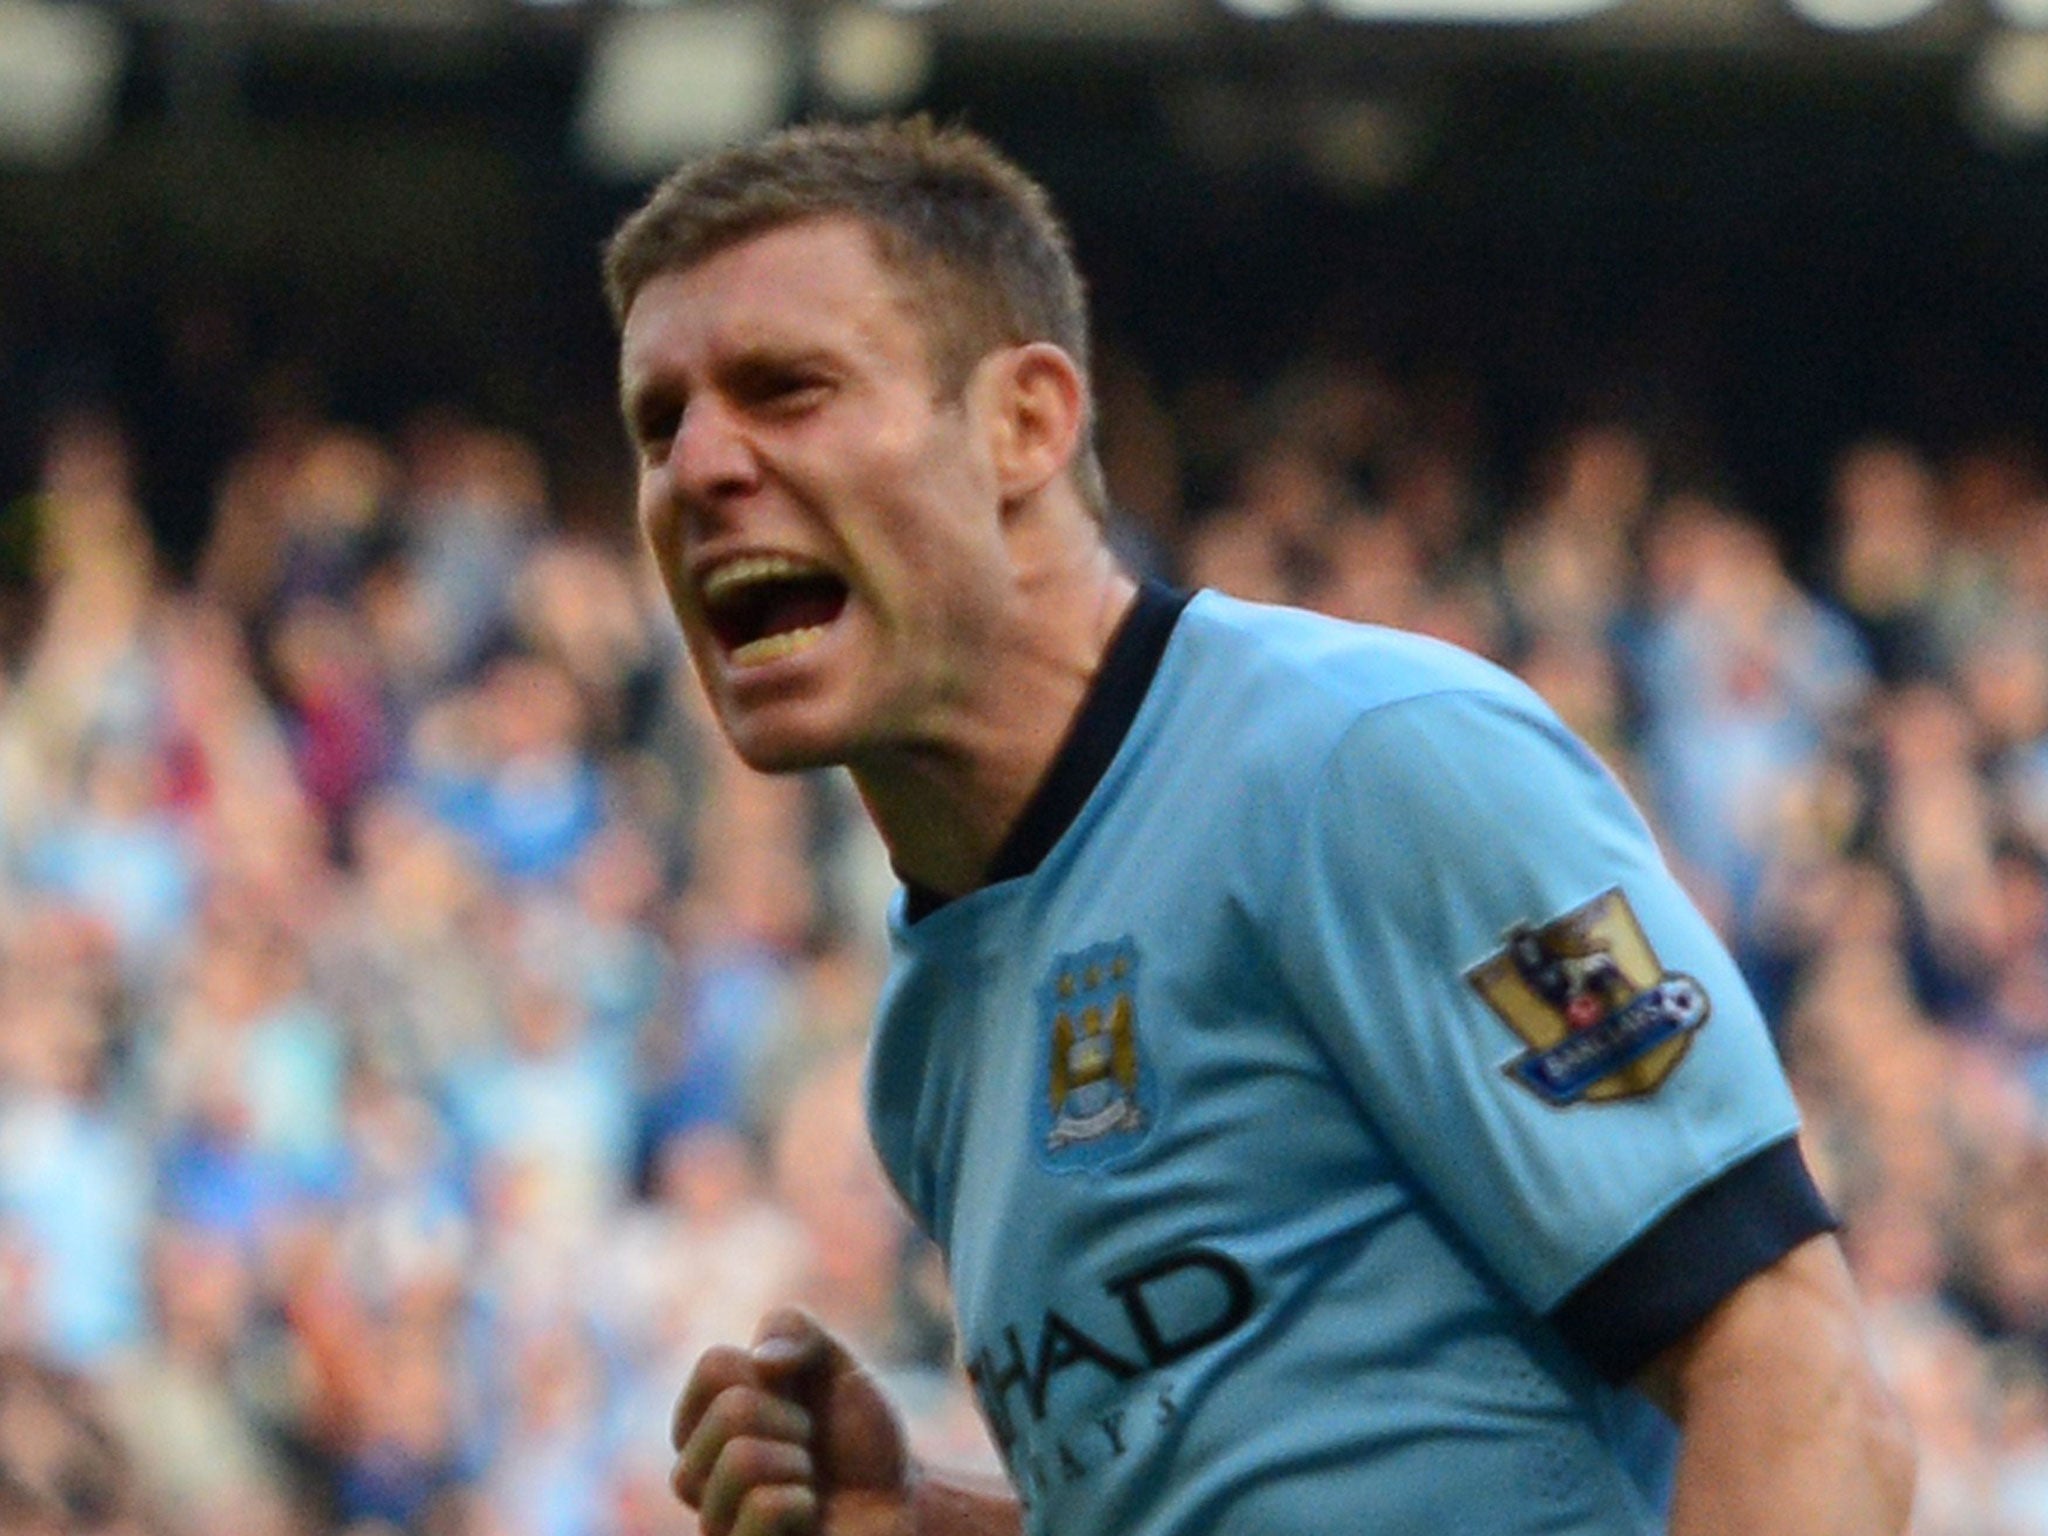 Frank Lampard may not have celebrated, but James Milner certainly did